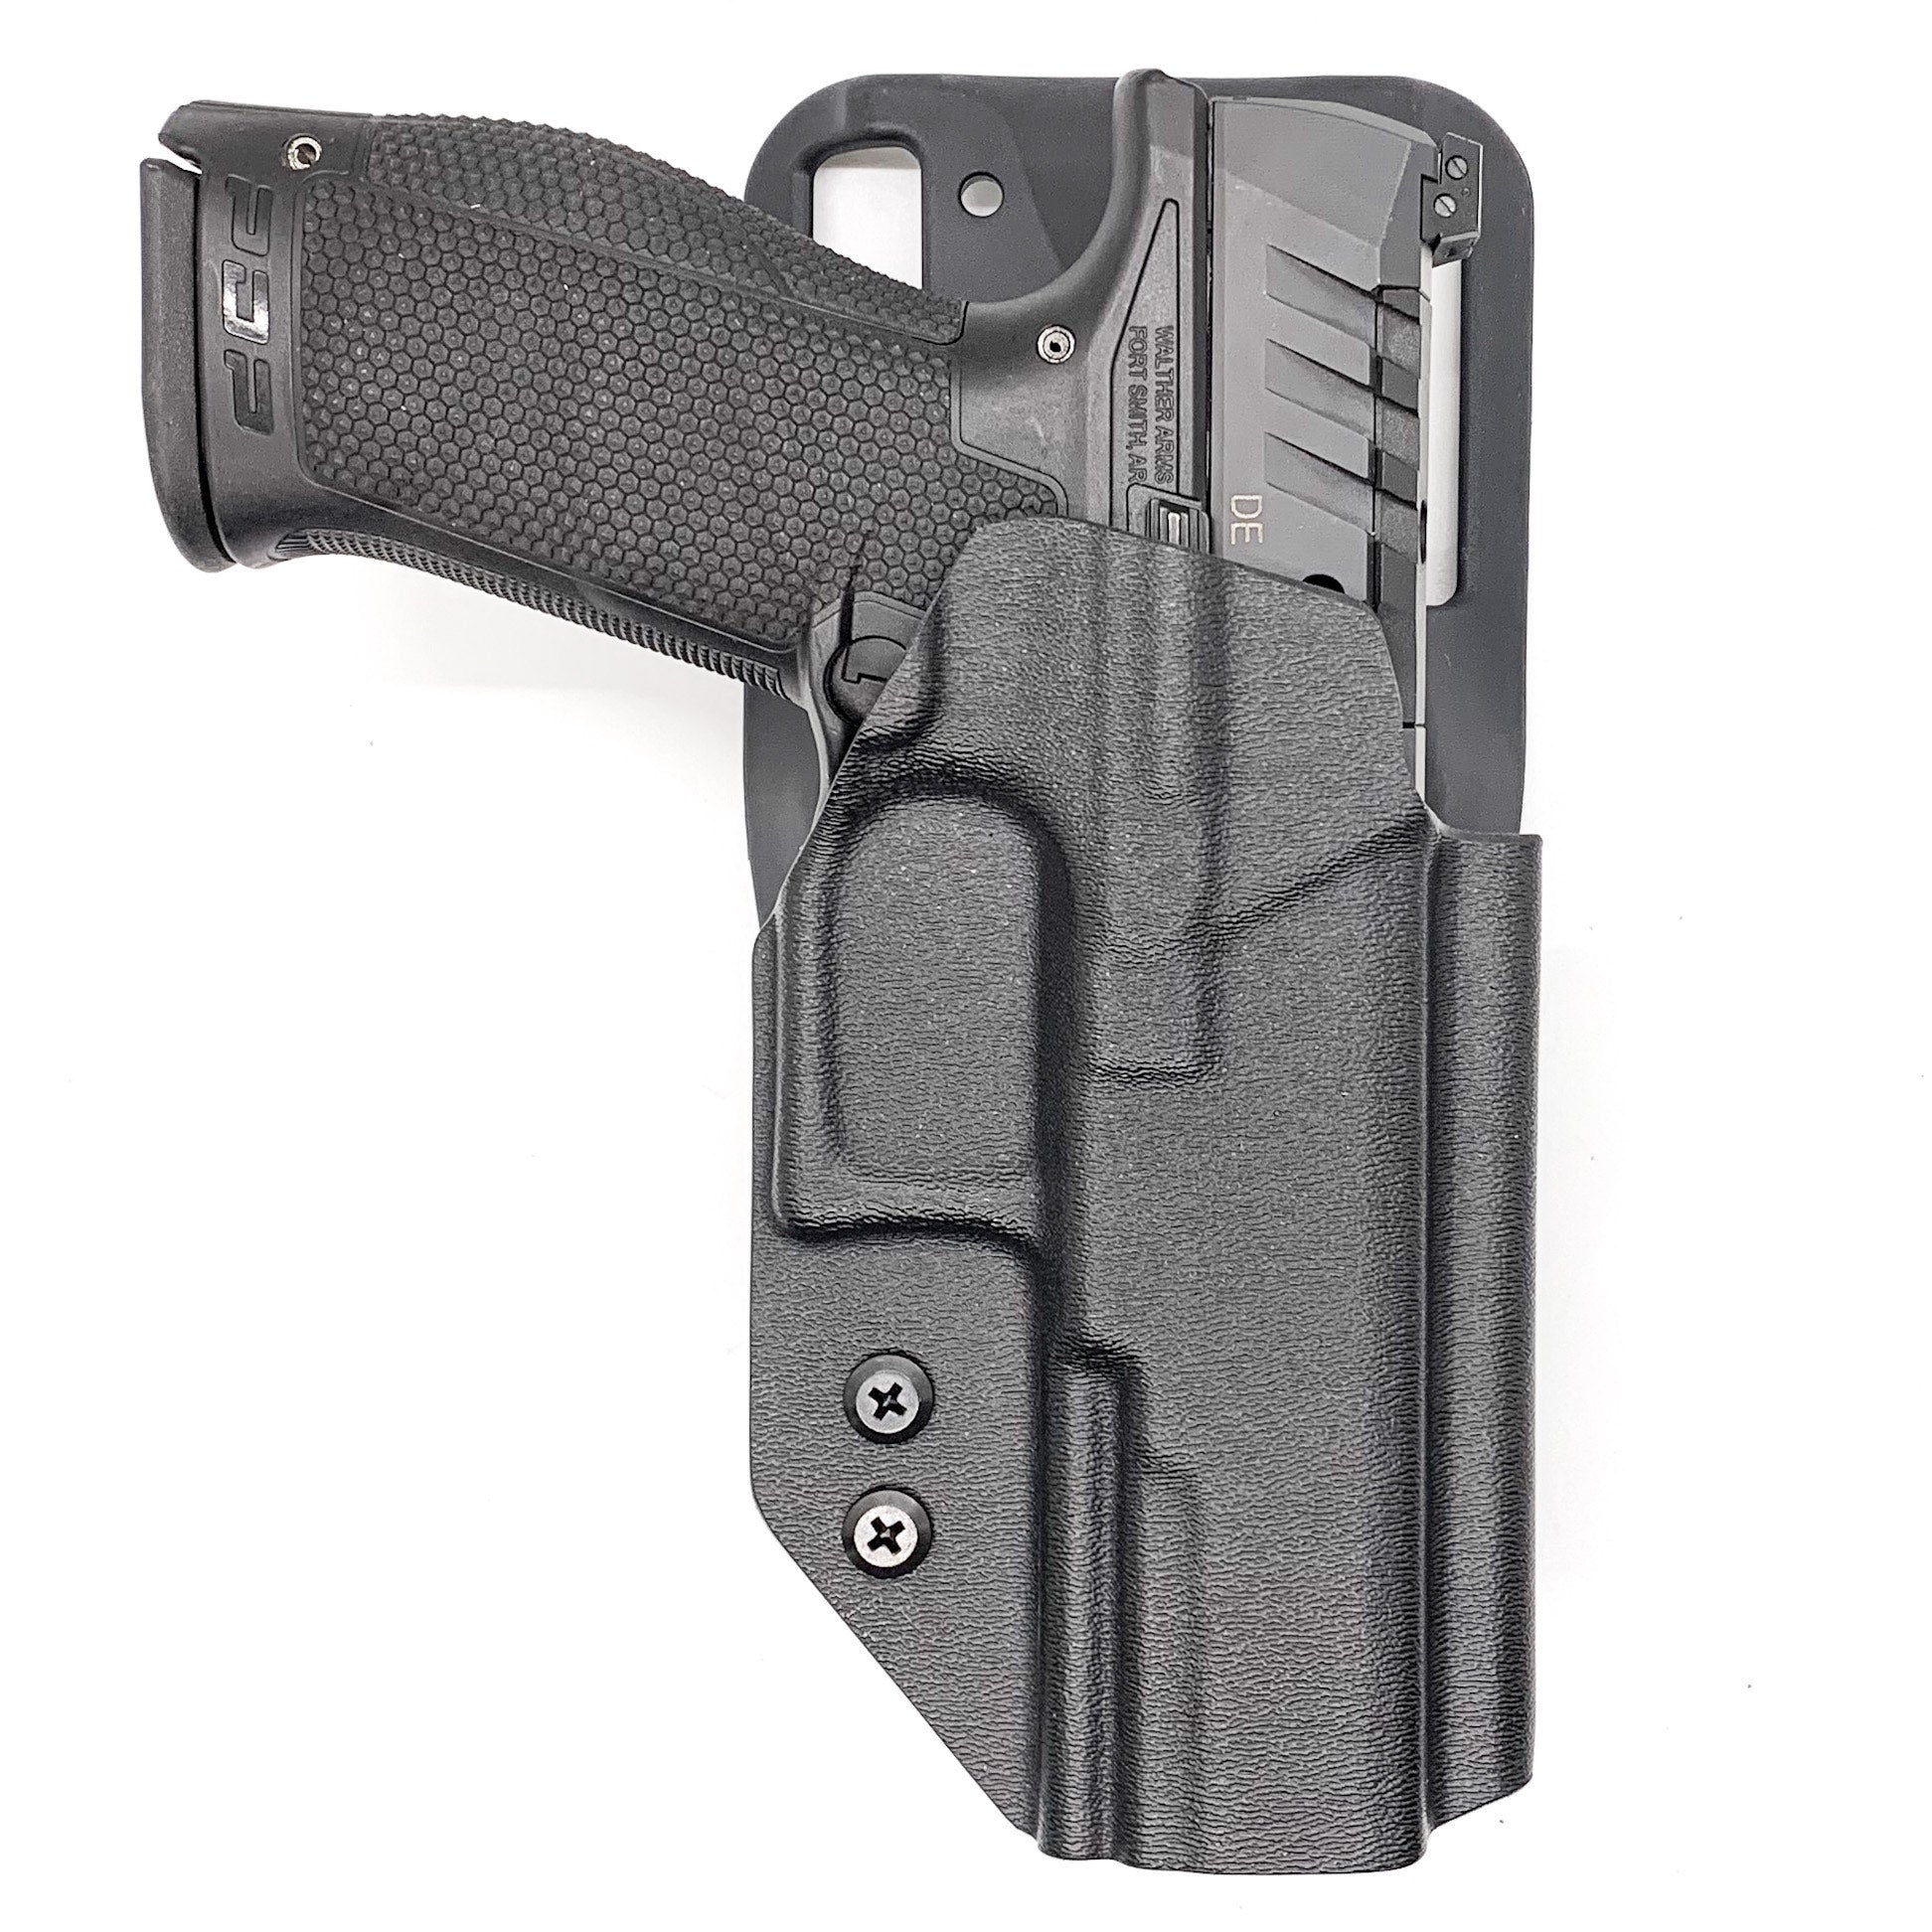 For the best outside waistband OWB Kydex duty or competition style holster designed to fit the Walther PDP 4.5" Full-Size and PDP Pro SD Compact 4" pistols shop Four Brothers Holsters. Cut for red dot sights, adjustable retention, and open muzzle for threaded barrel or compensator.